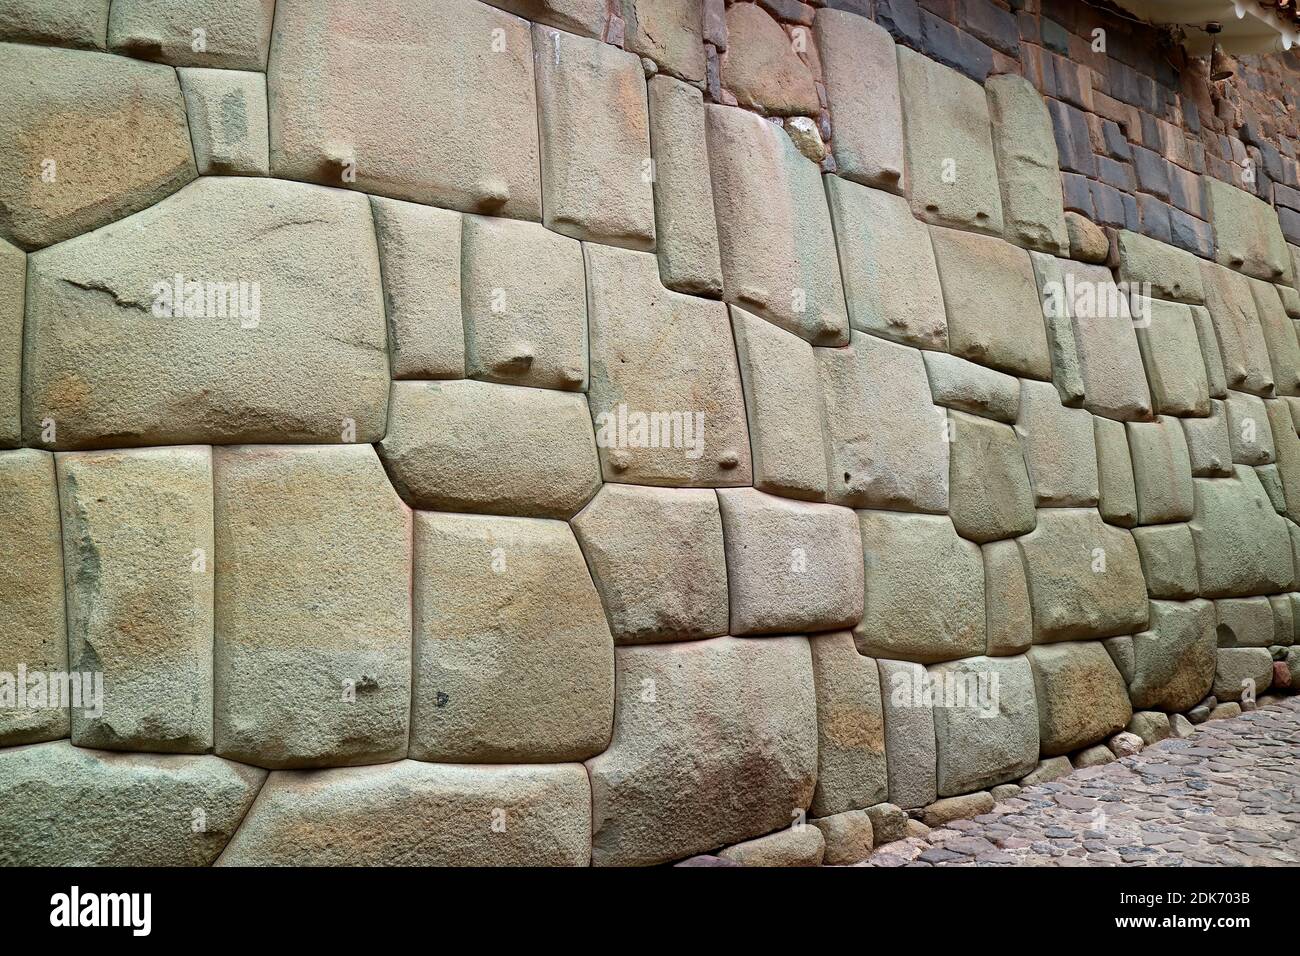 Amazing Stonework of the Inca Wall on Hatun Rumiyoc Street, the Ancient Street in Historic Centre of Cusco, Peru, South America Stock Photo